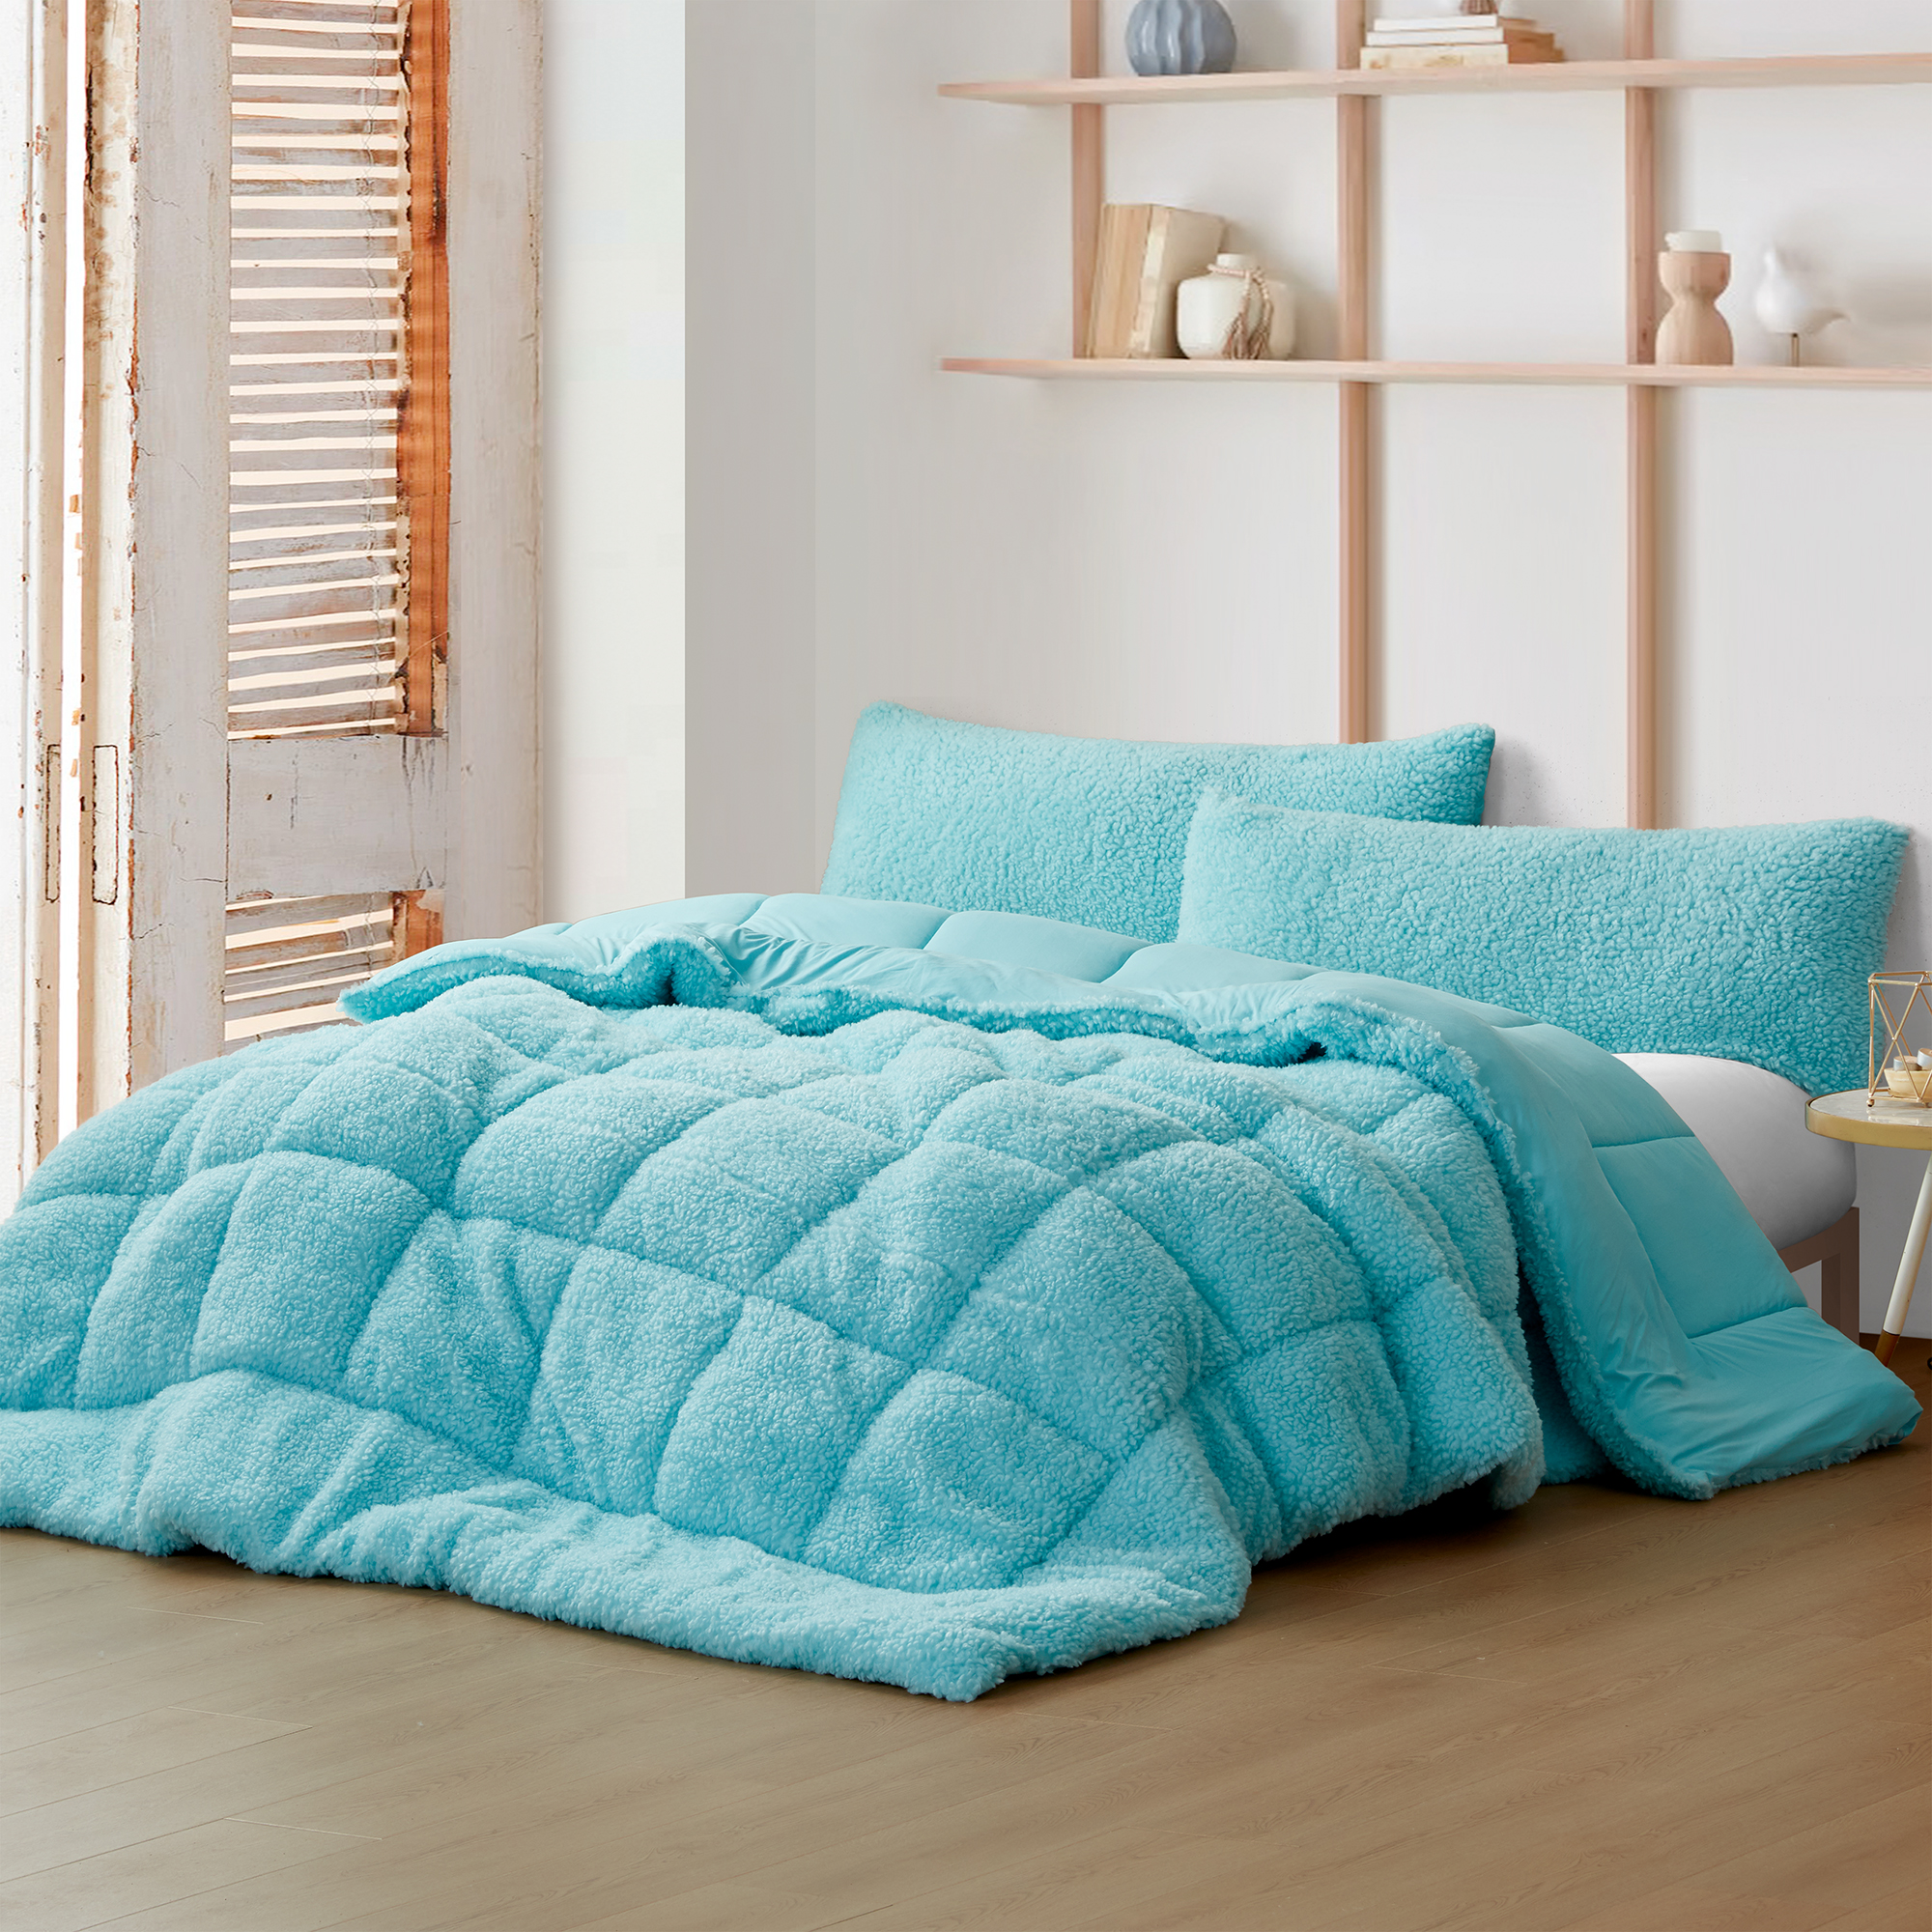 Cotton Candy - Coma Inducer® Full Comforter - Blueberry